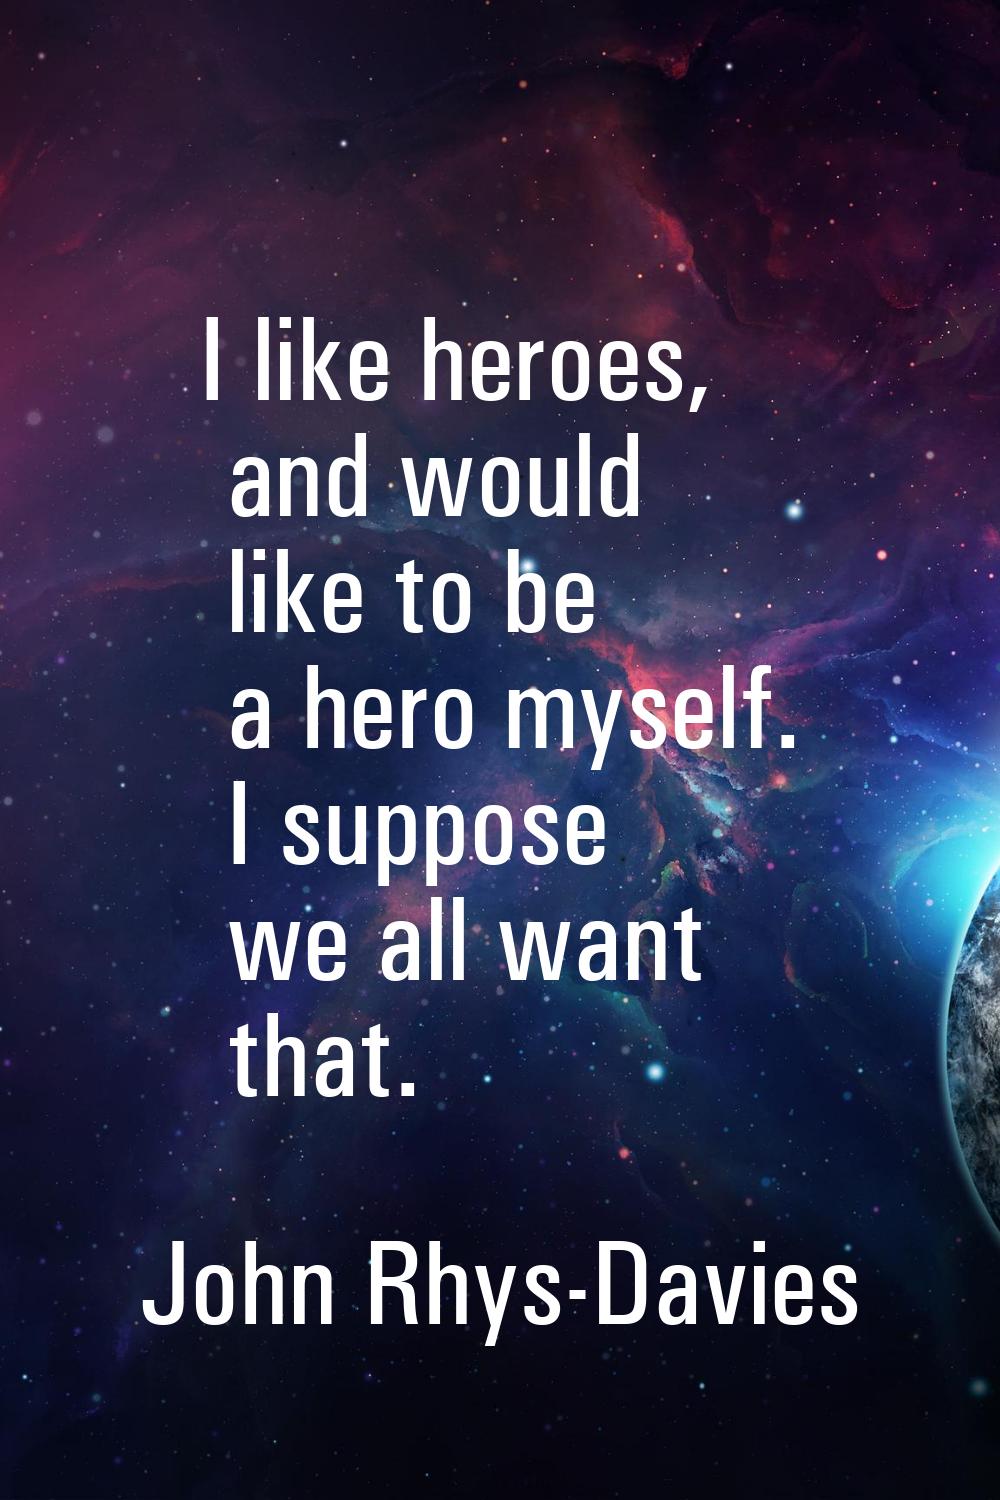 I like heroes, and would like to be a hero myself. I suppose we all want that.